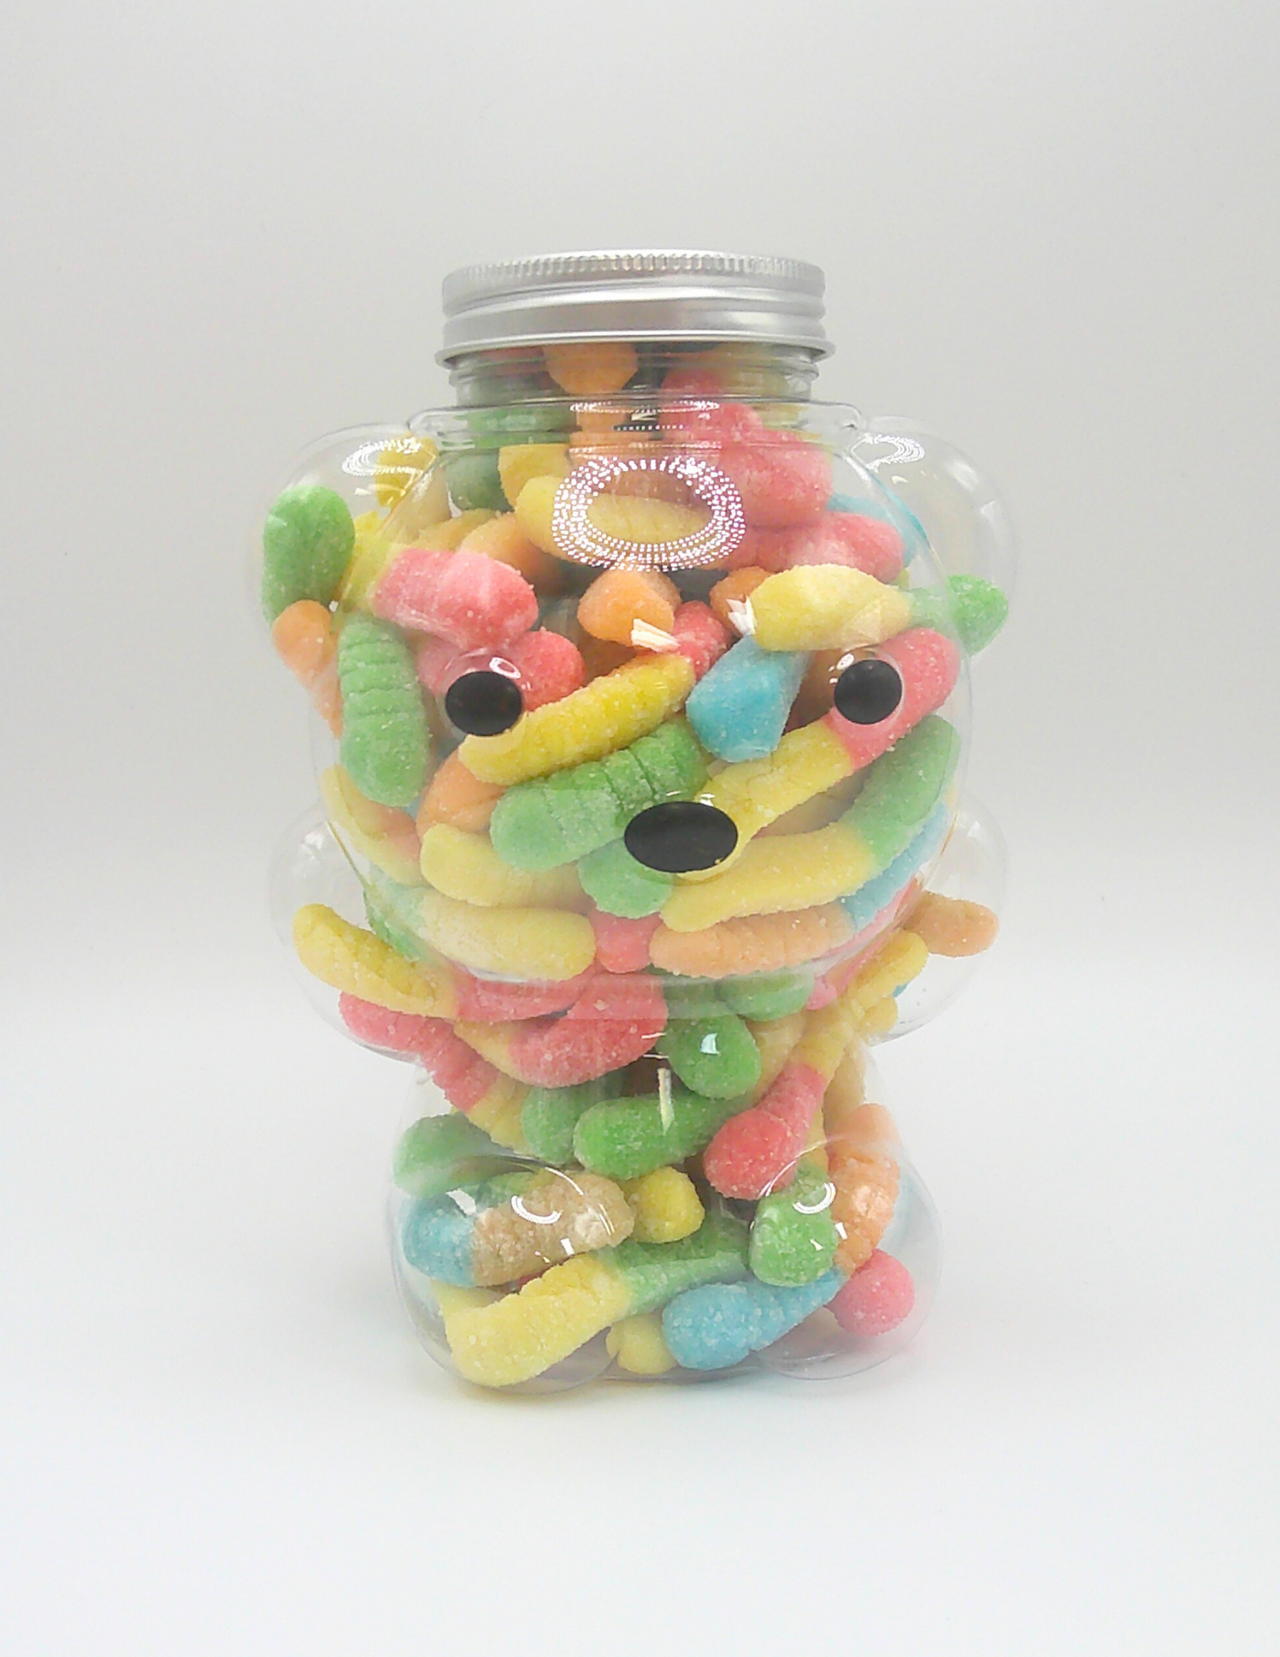 Jar of Sour Worms